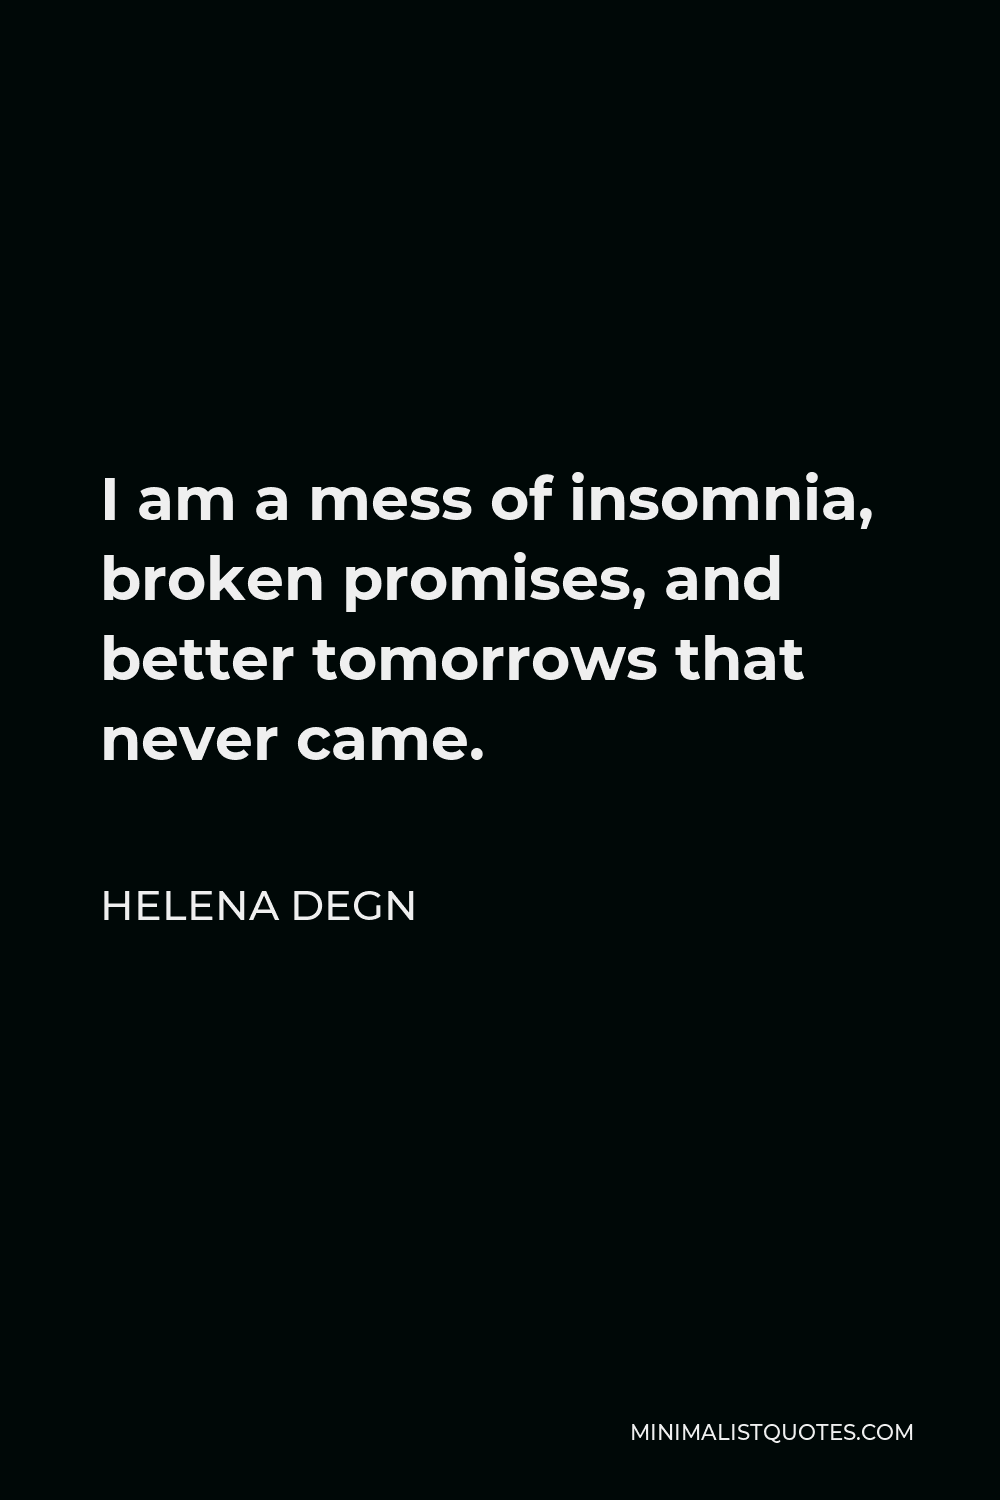 Helena Degn Quote - I am a mess of insomnia, broken promises, and better tomorrows that never came.